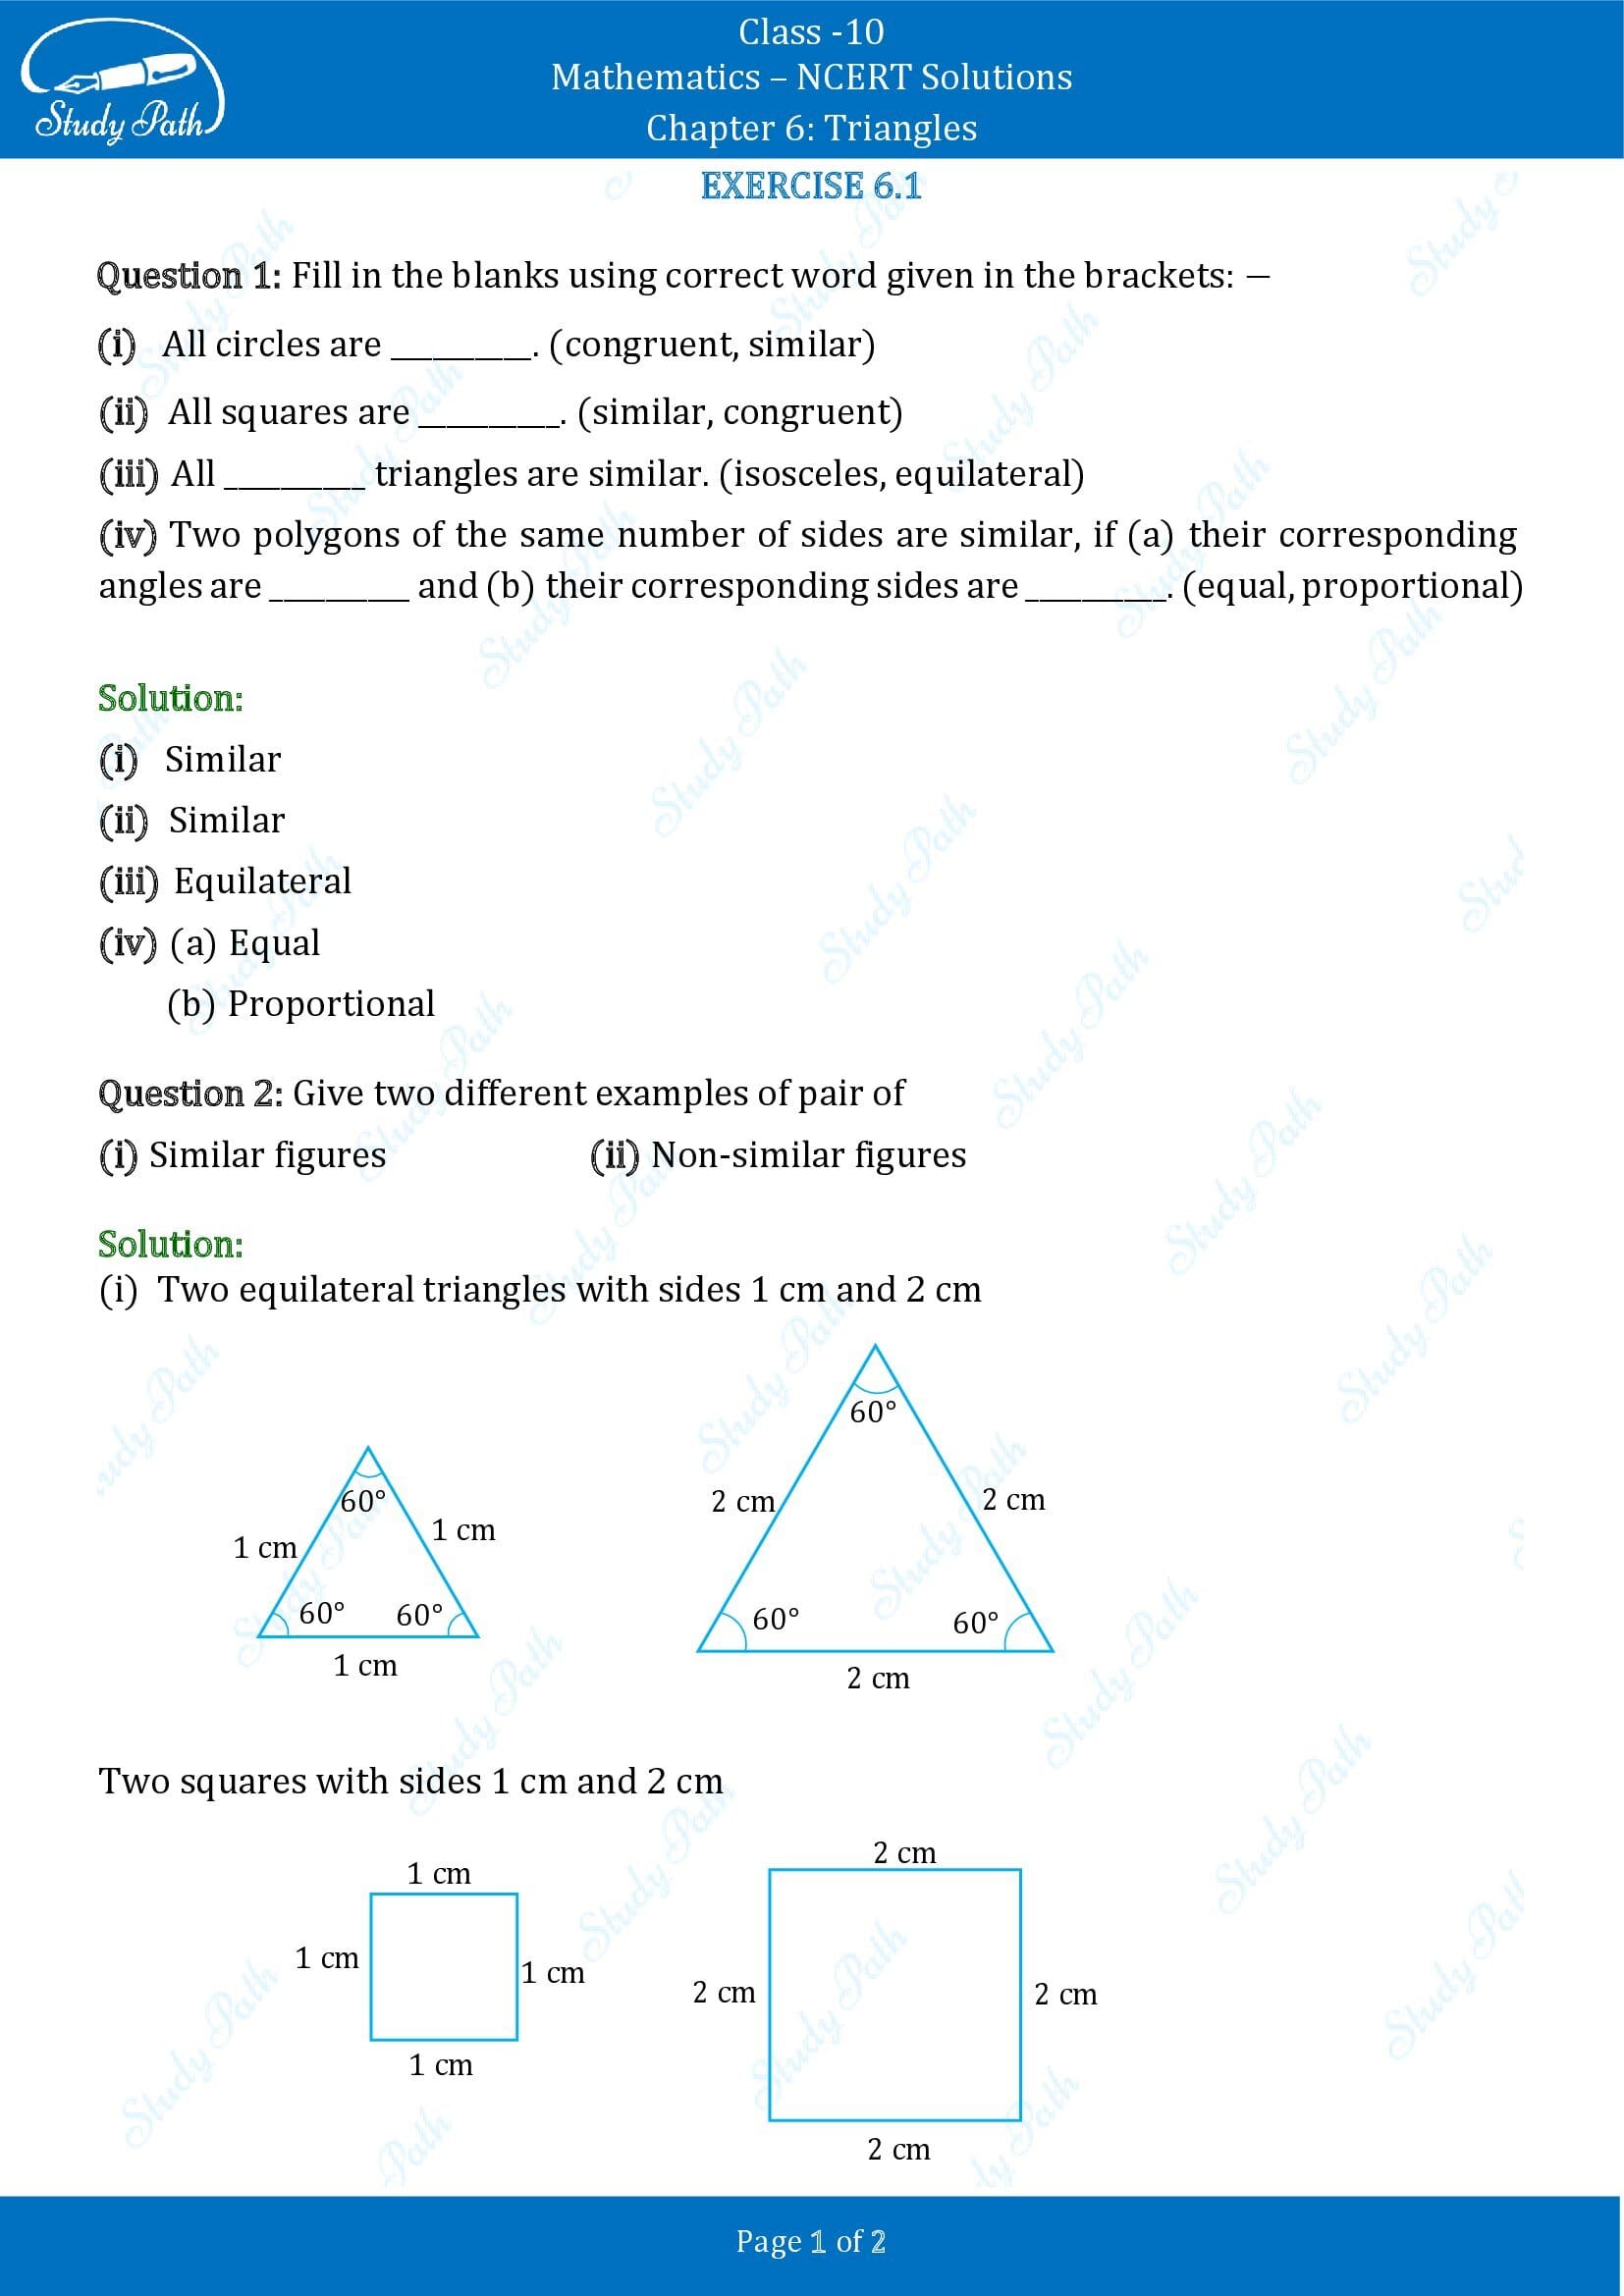 NCERT Solutions for Class 10 Maths Chapter 6 Triangles Exercise 6.1 00001